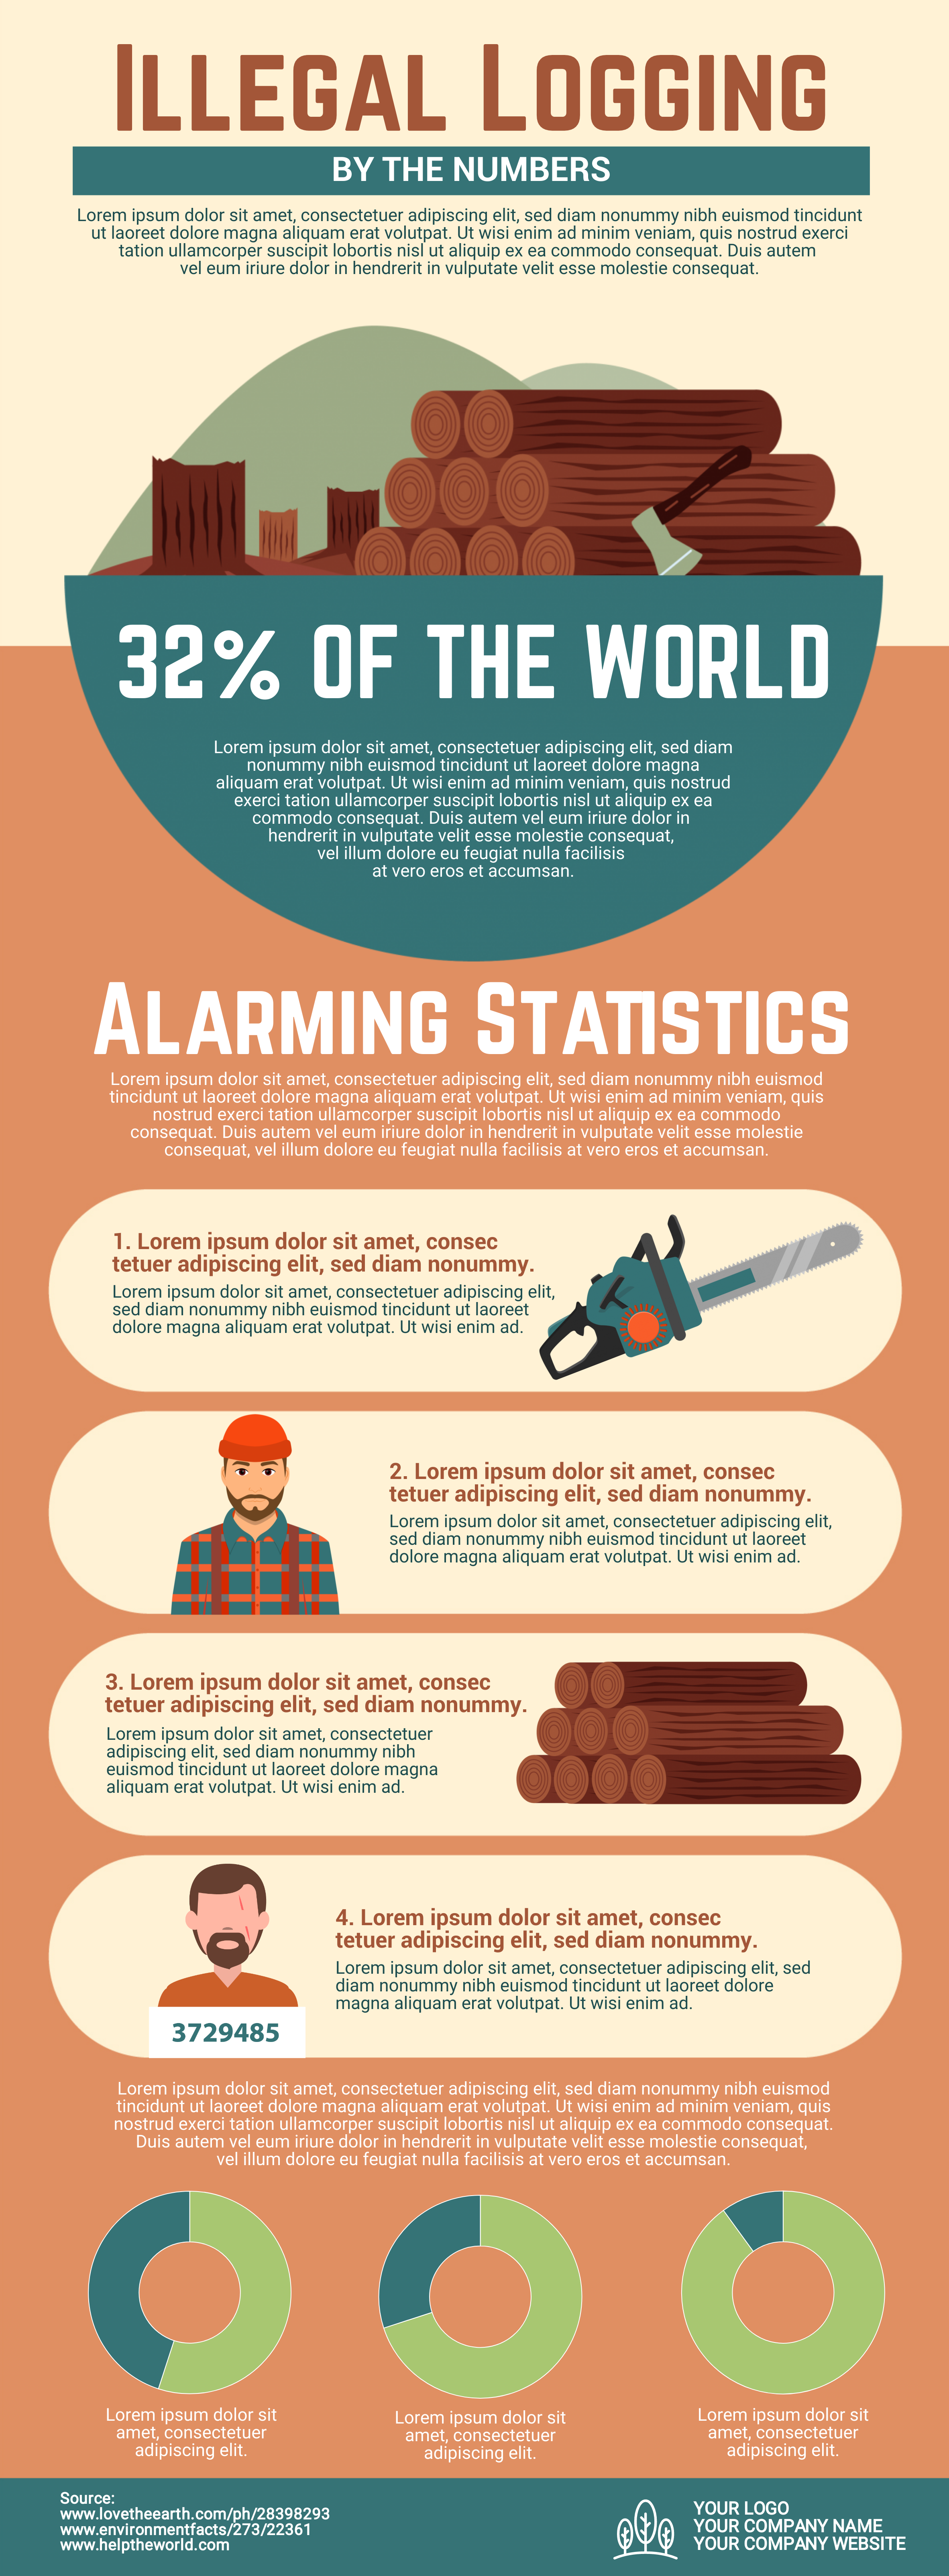 Illegal logging infographic template